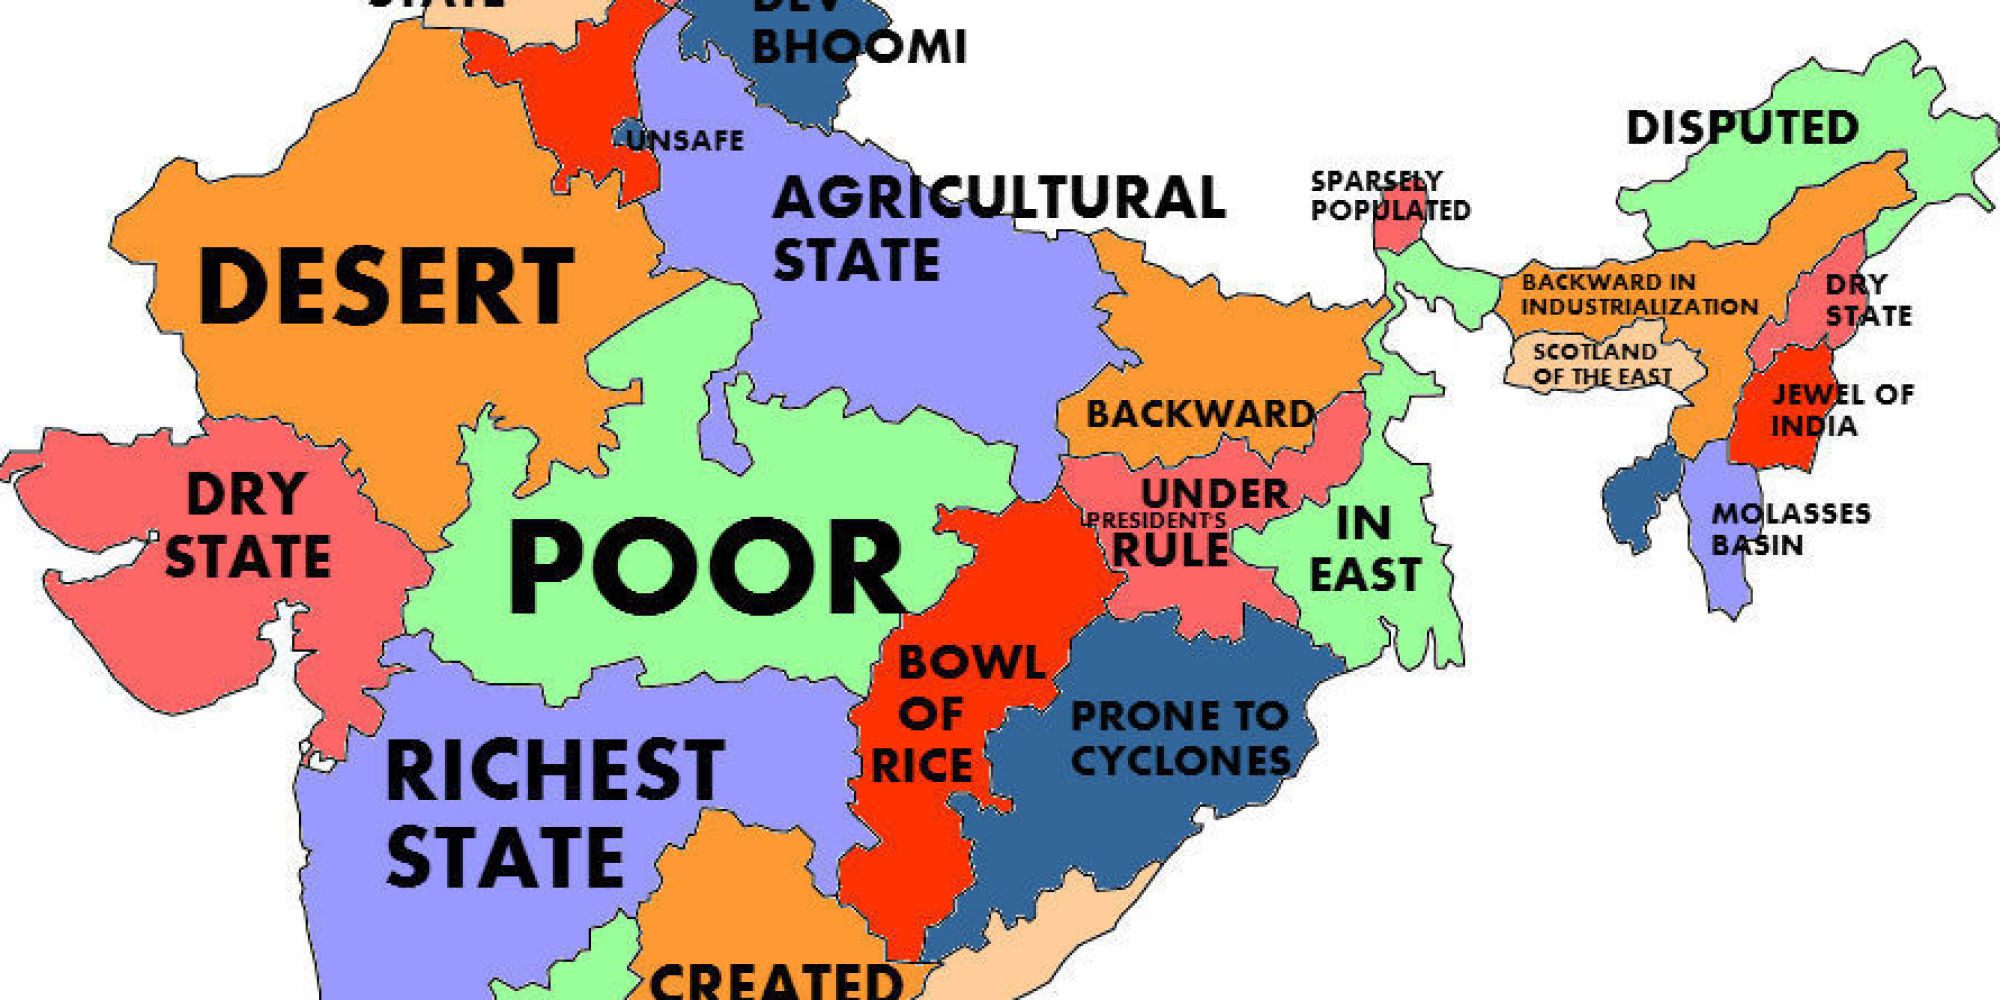 What The World Thinks Indian States According To Google